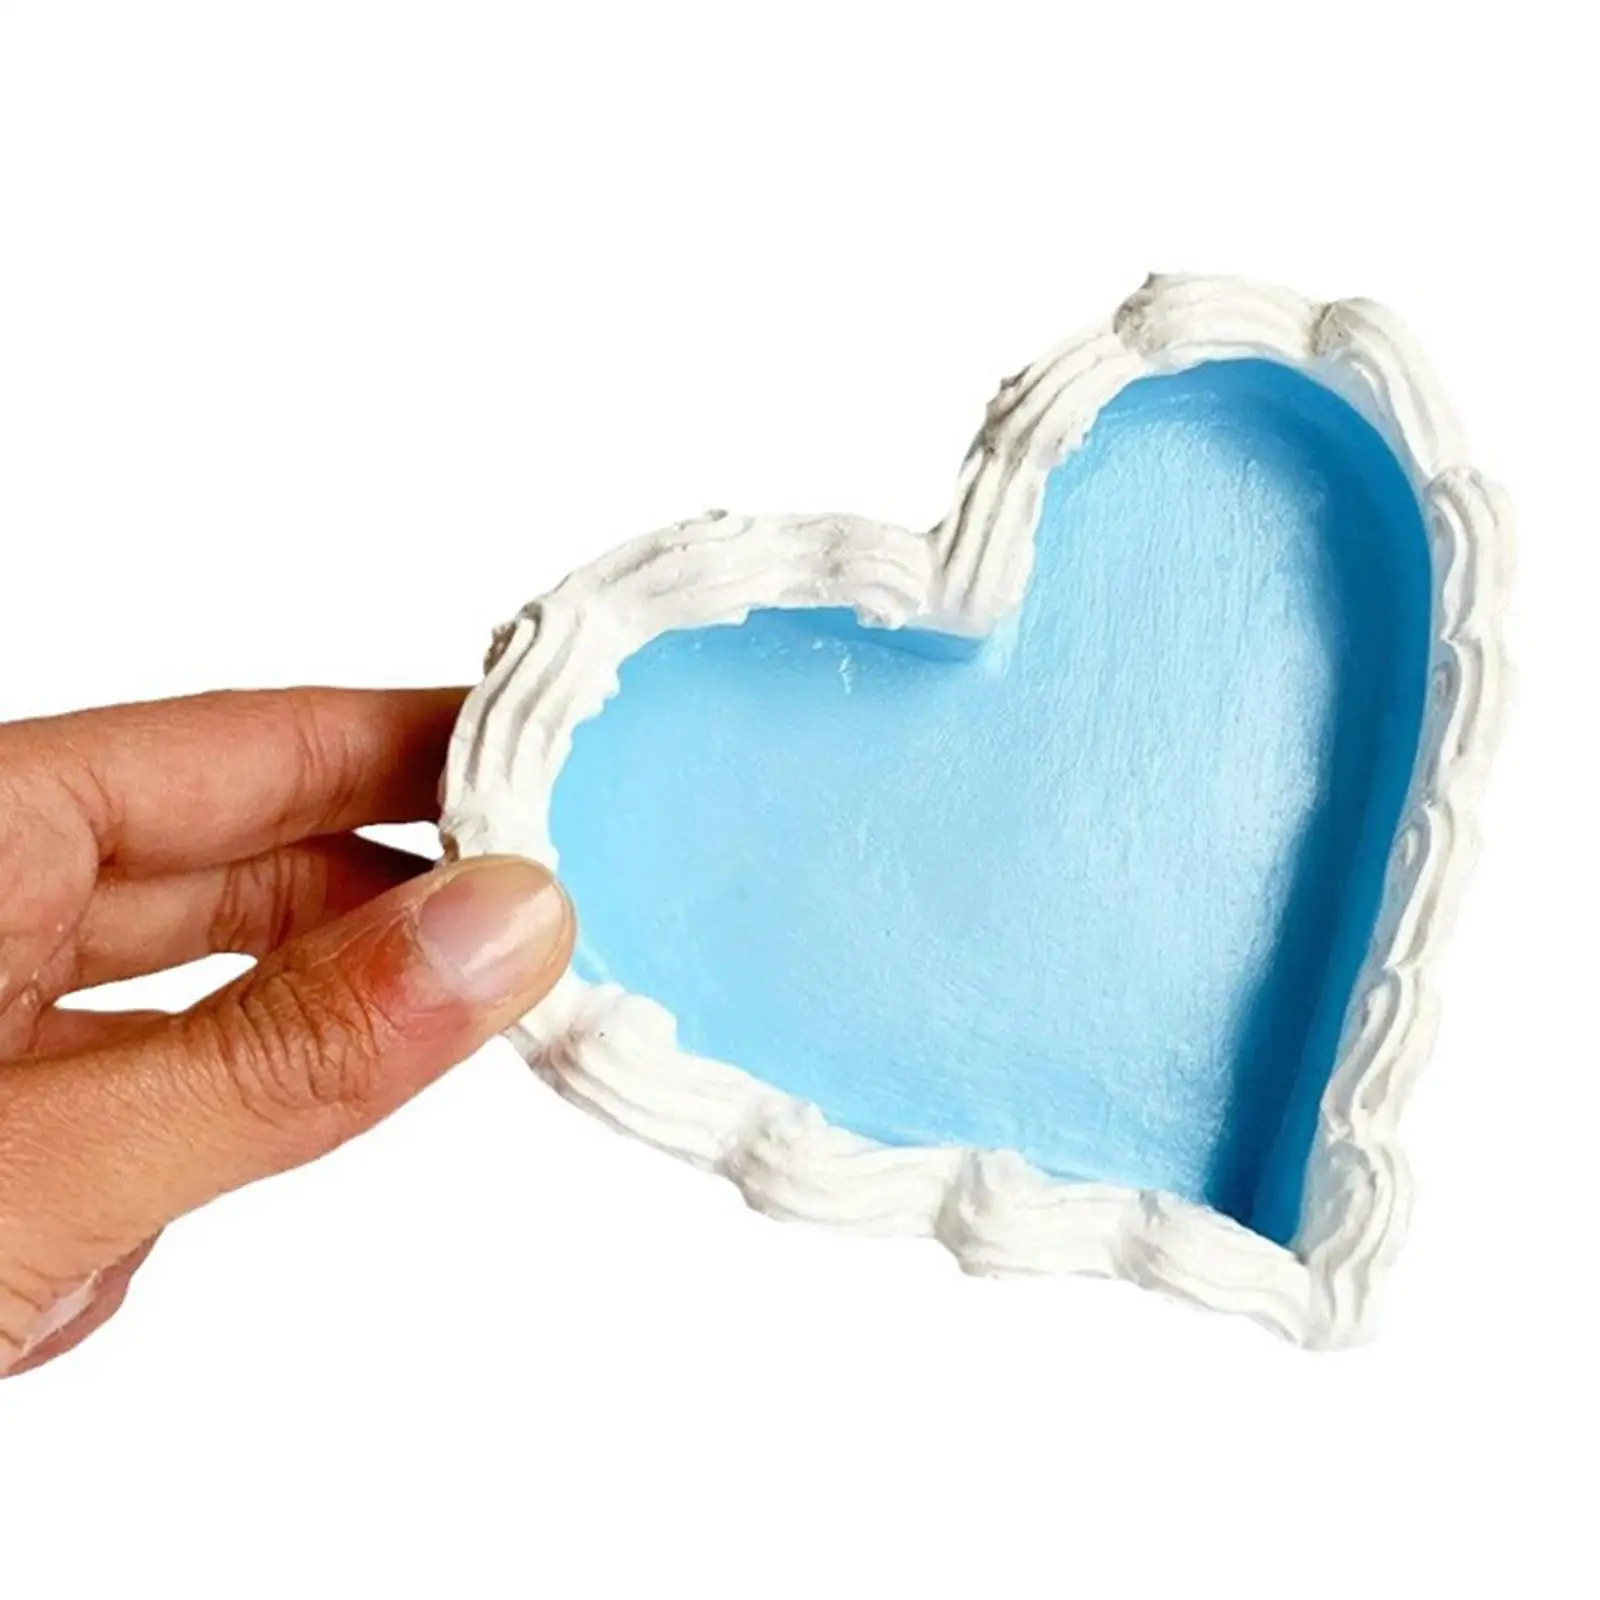 Heart Shaped Jewelry Tray Multifunction Display Plate Storage Ring Dish for Office Desktop Bedroom Table Centerpieces Wedding